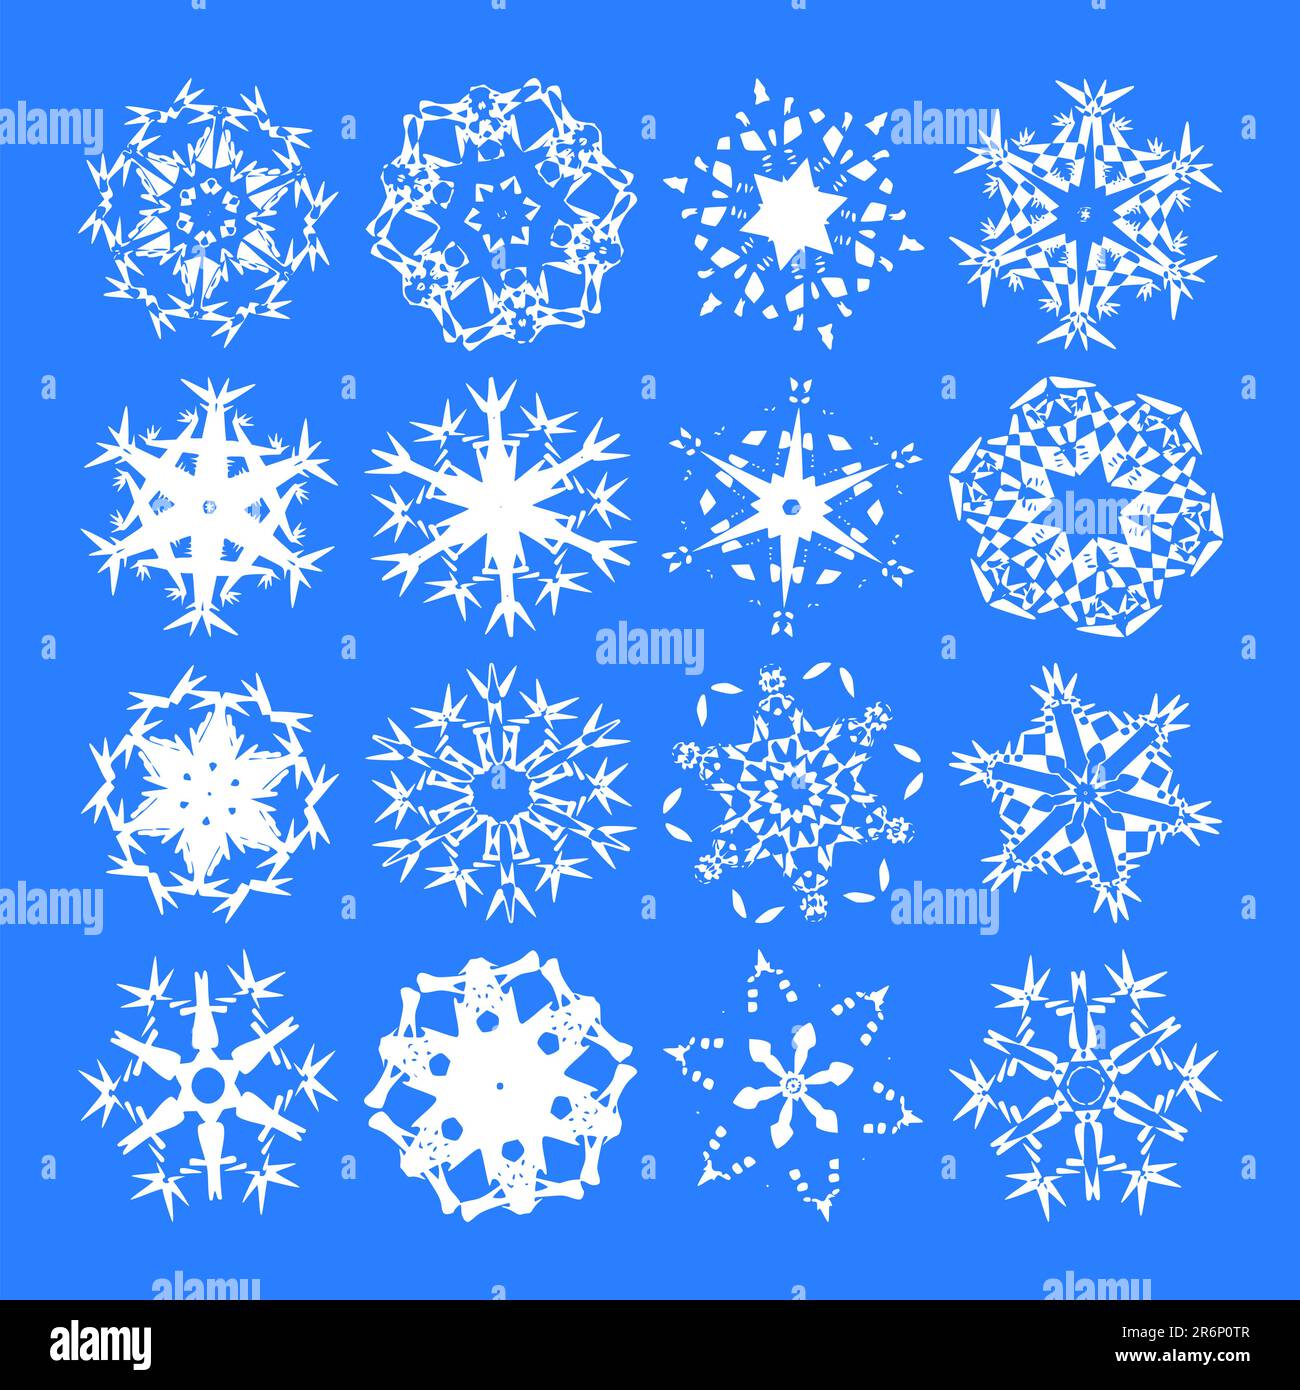 Snowflakes, White vector snowflakes on a blue background Stock Vector